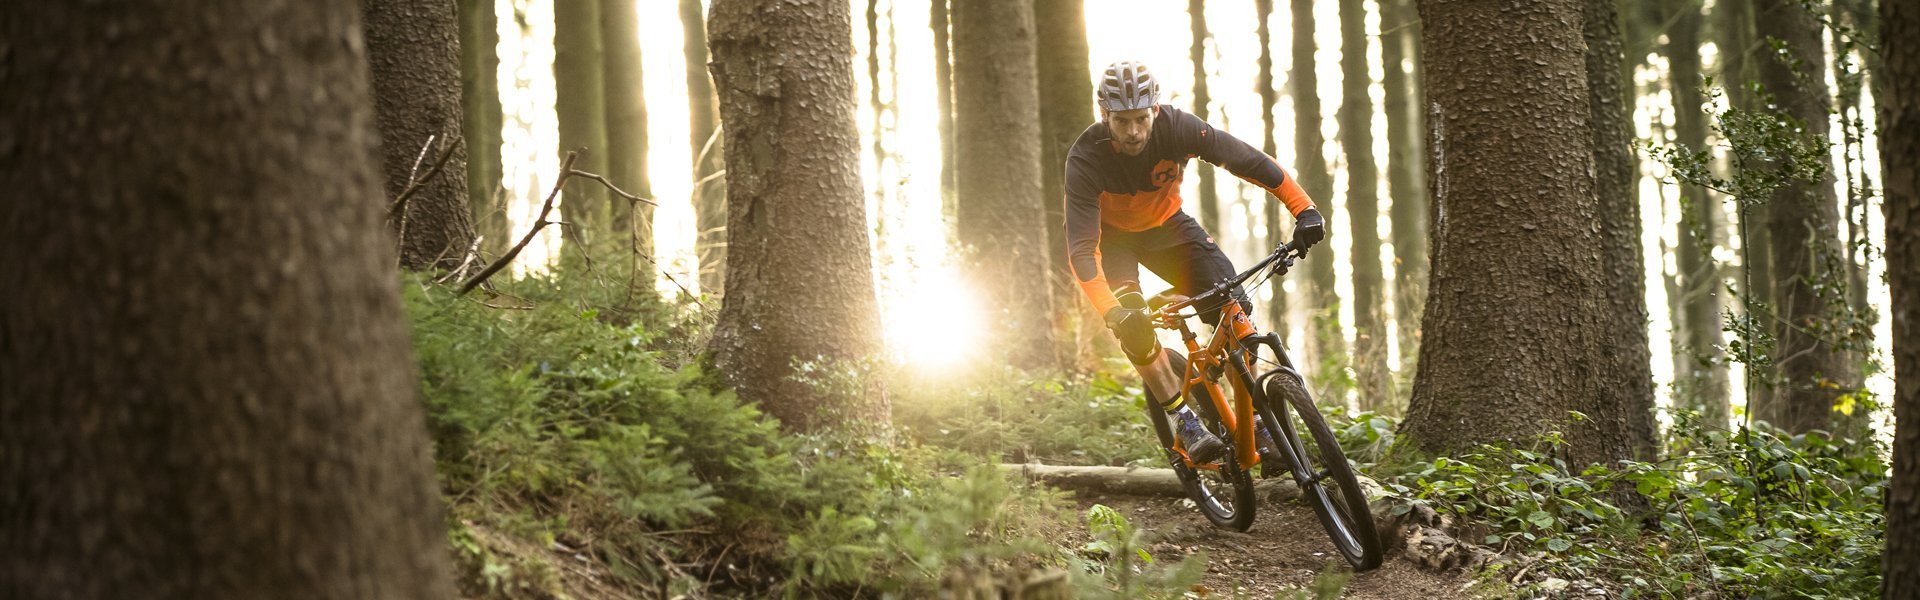 Rainer shredding trails with the OneUp pedal.